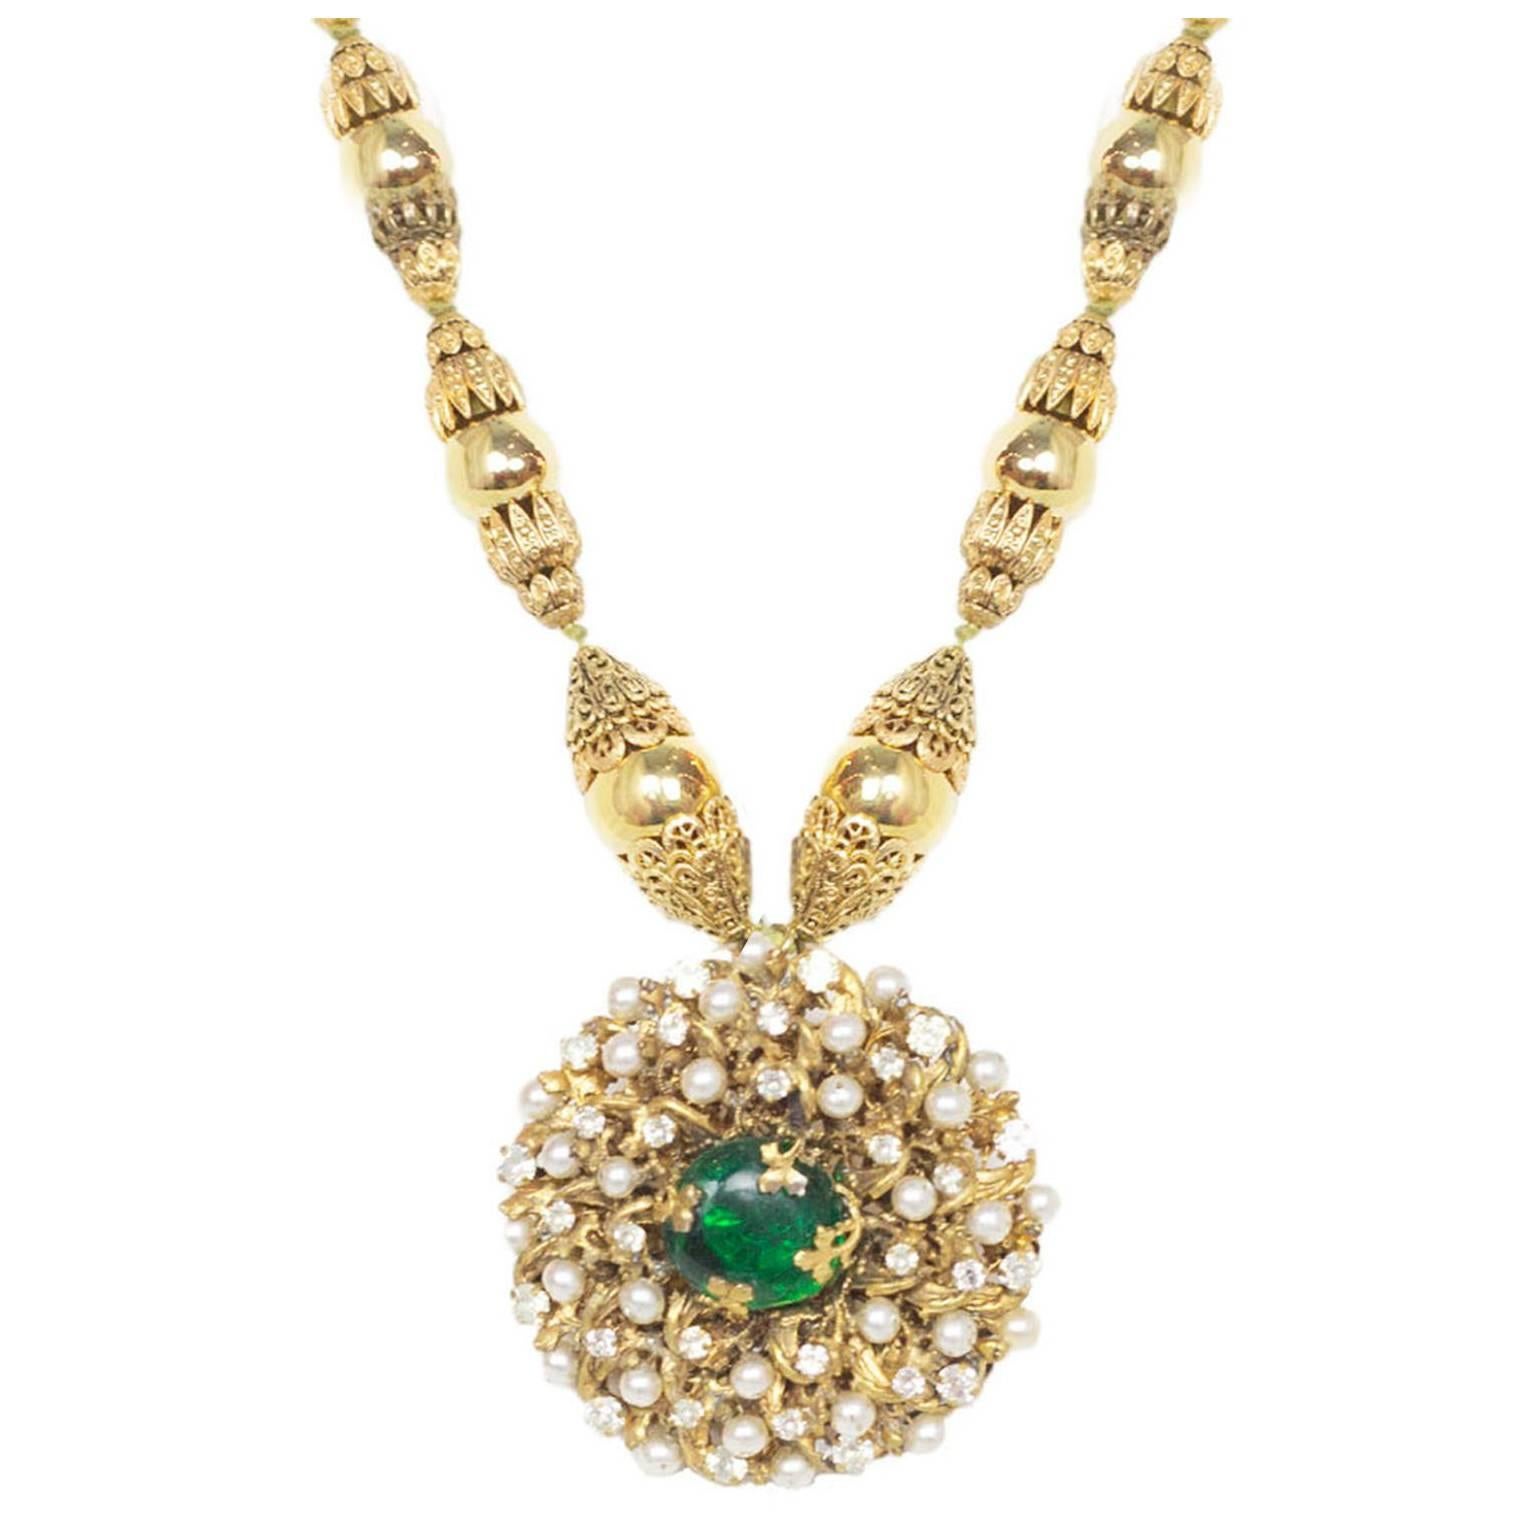 Chanel Collectors 3 Star Couture Faux Pearl And Green Gripoix Necklace